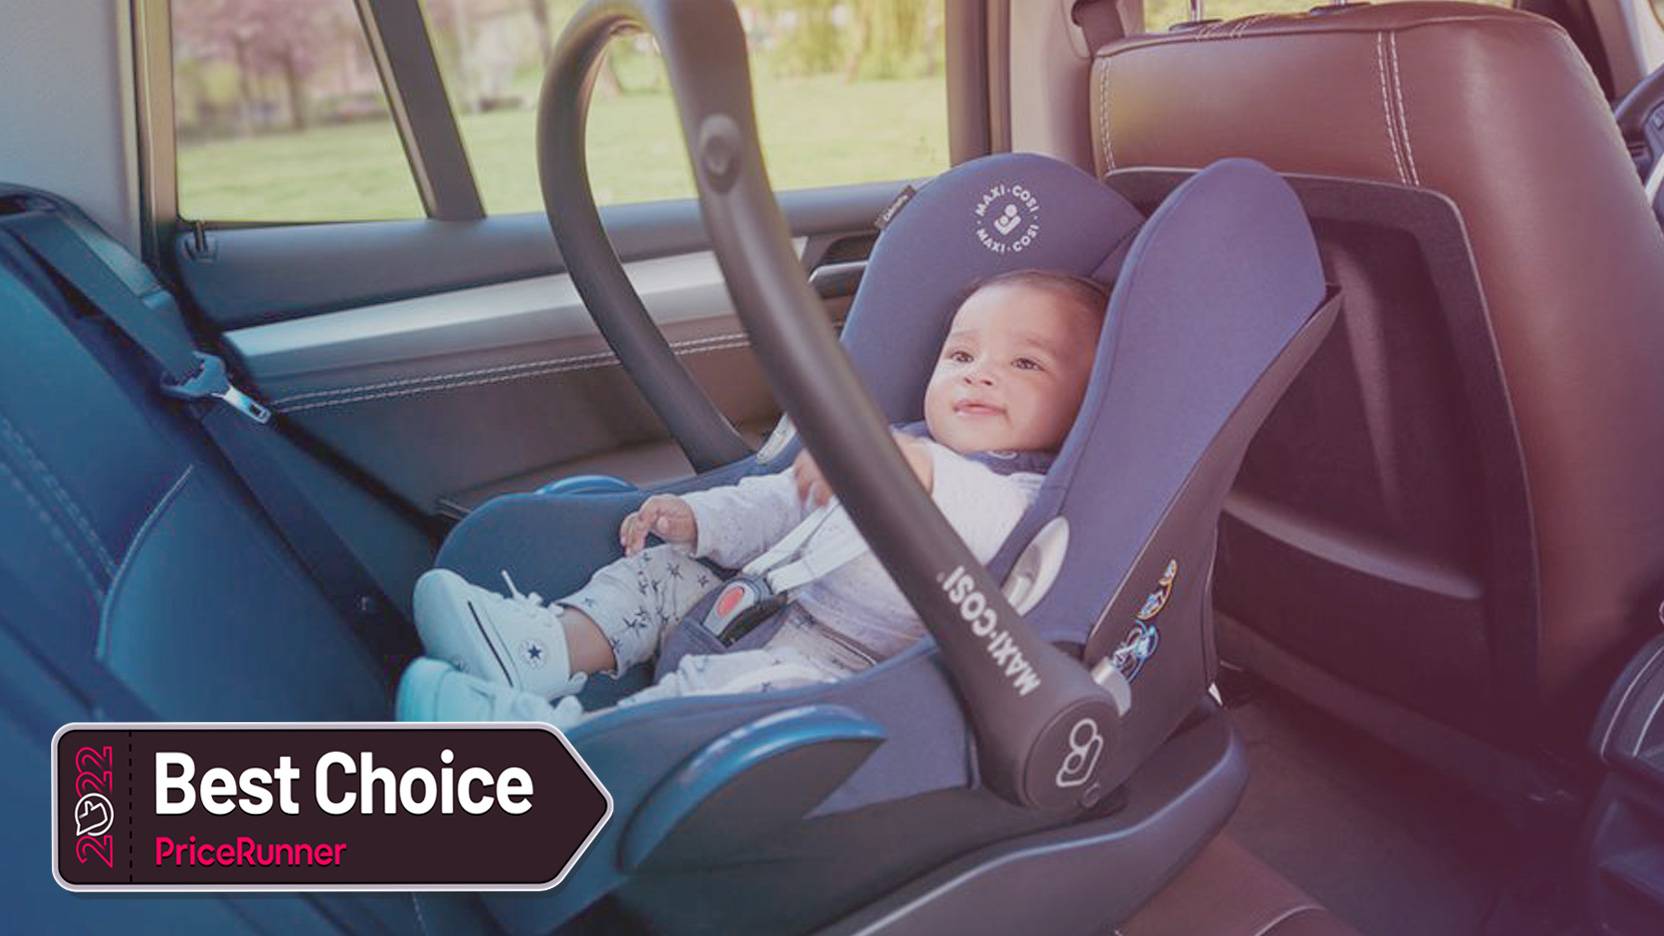 Top 14 Best Baby & → 2022 seats car Reviewed of Ranked